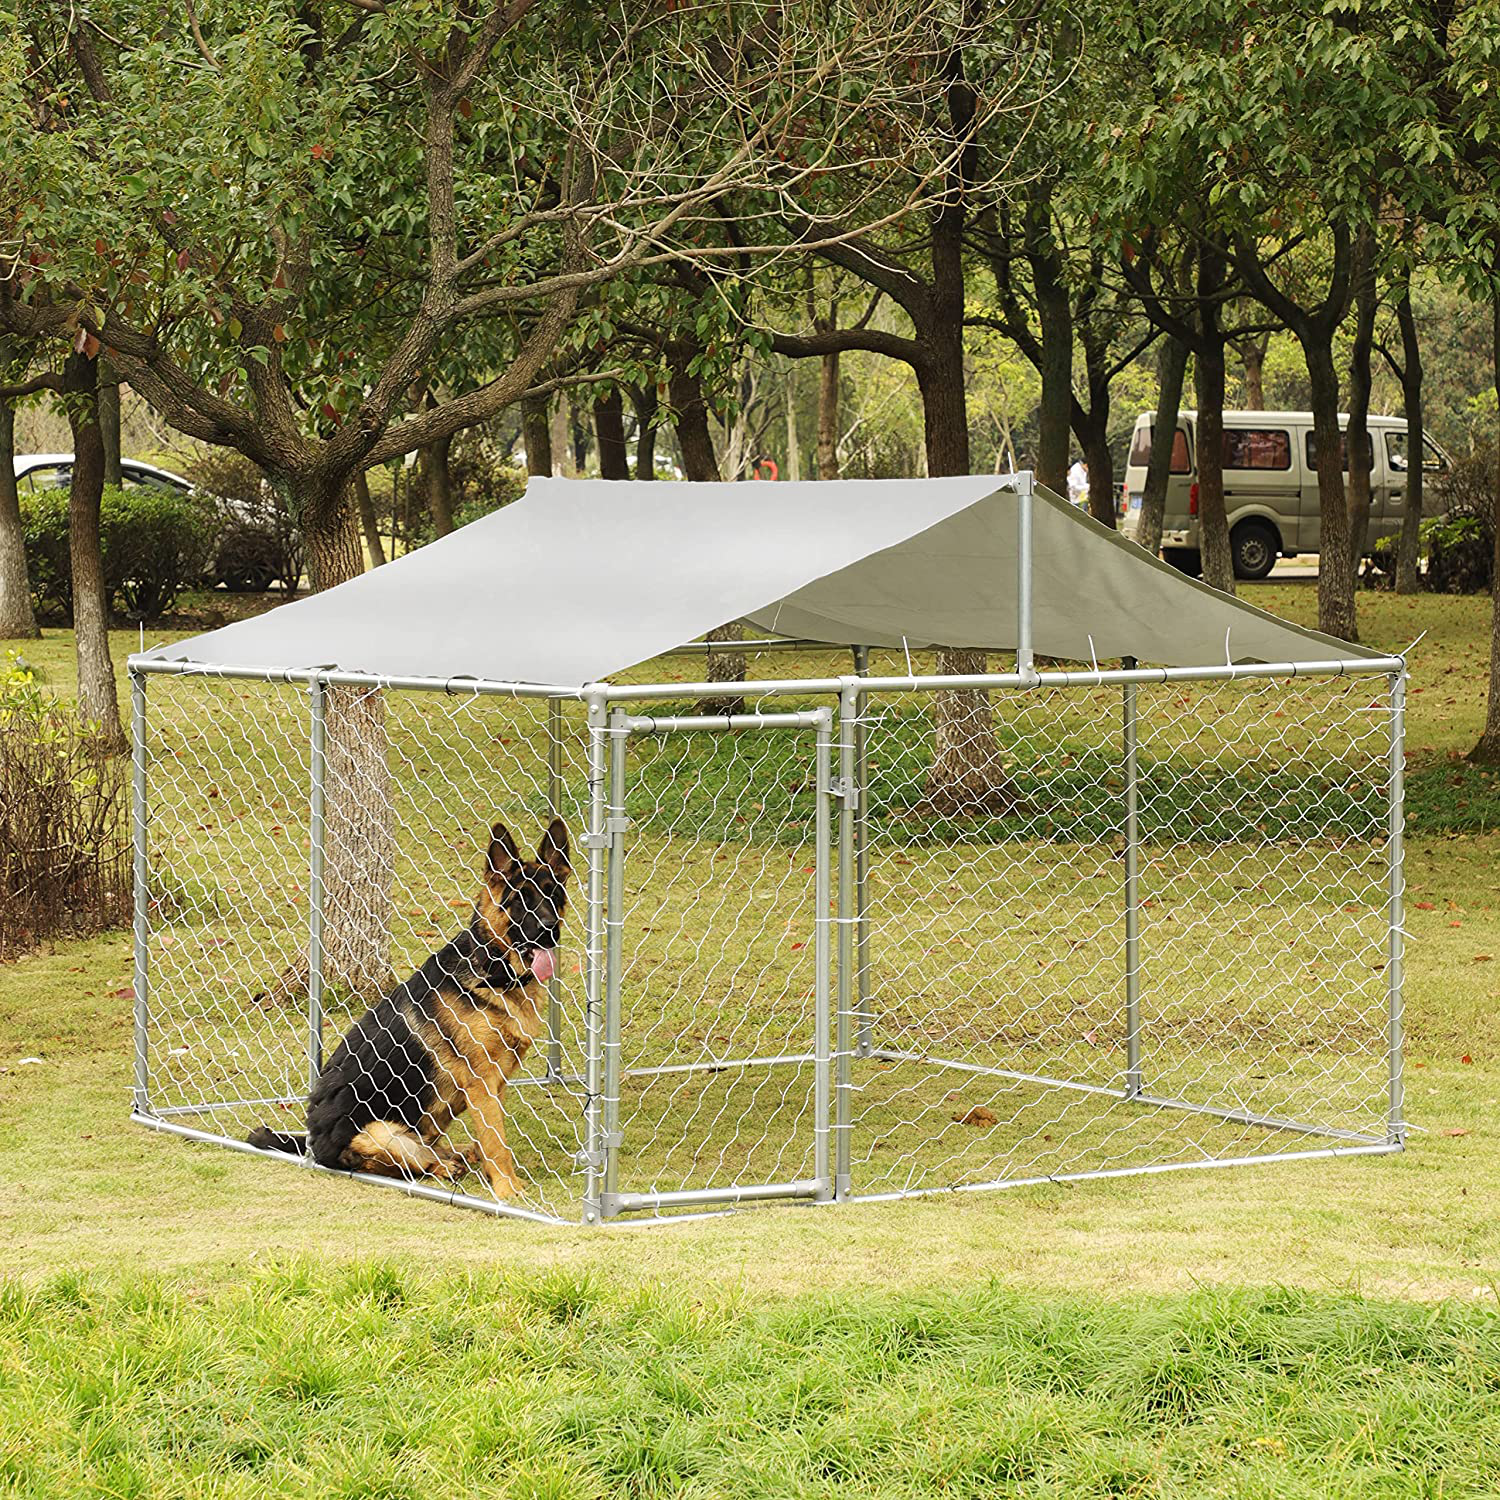 MAGIC UNION Dog Kennel Dog Fence Outdoor Metal Dog Cage outside Dog Run House Pet Enclosure Fencing with Water-Resistant Cover Roof Backyard Dog Play Pen